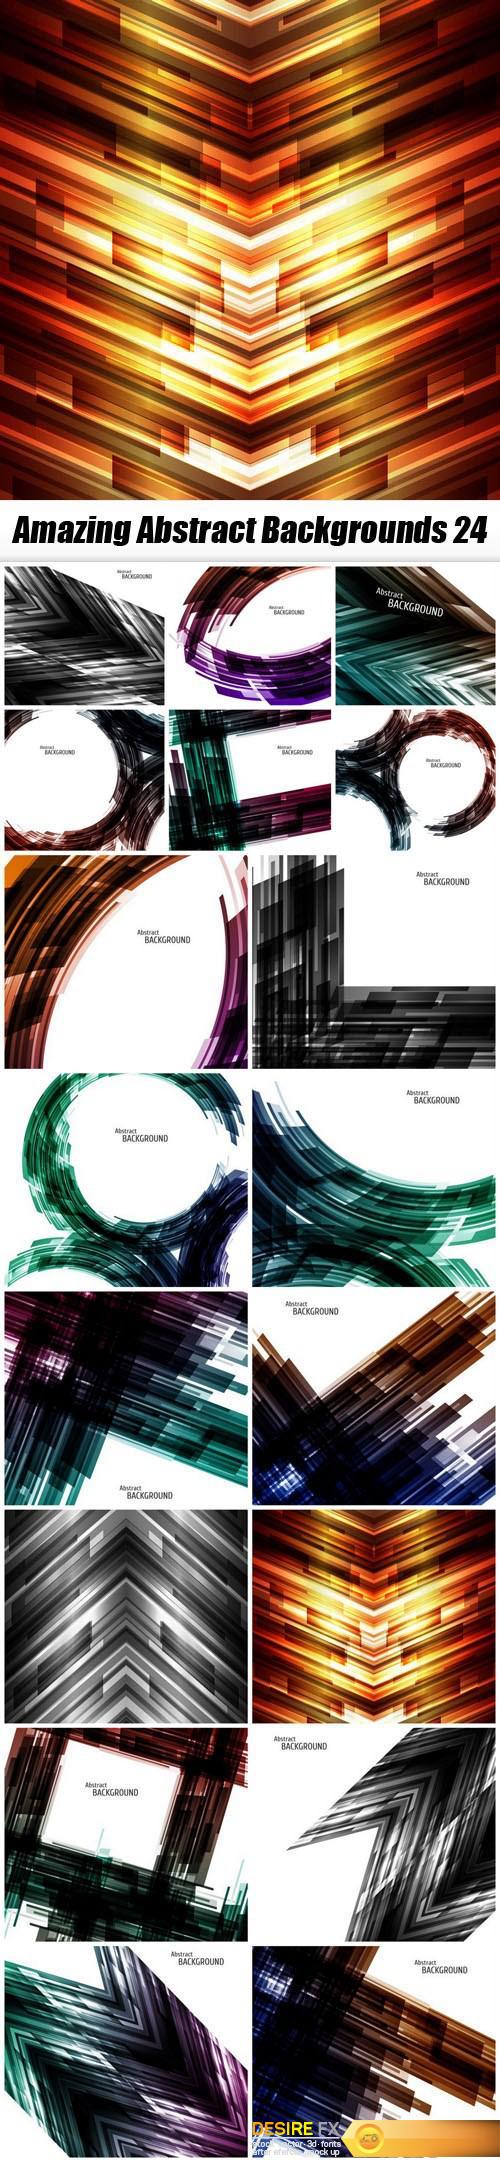 Amazing Abstract Backgrounds Collection 24 - 18xEPS